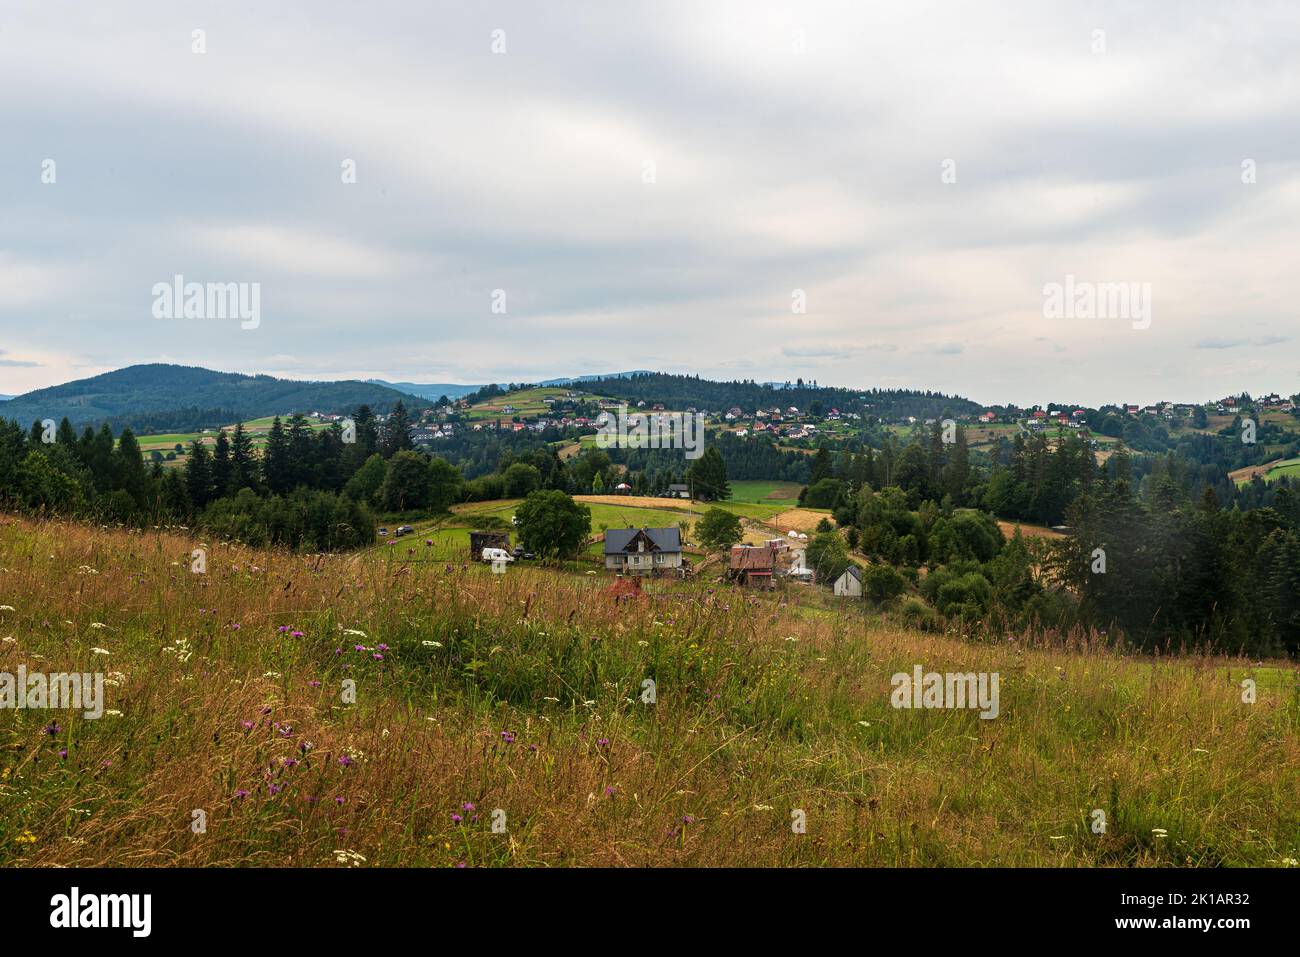 Jaworzynka village with hilly landscape with mix of meadows and forest covered hills around in Poland near borders with Czech republic and Slovakia Stock Photo